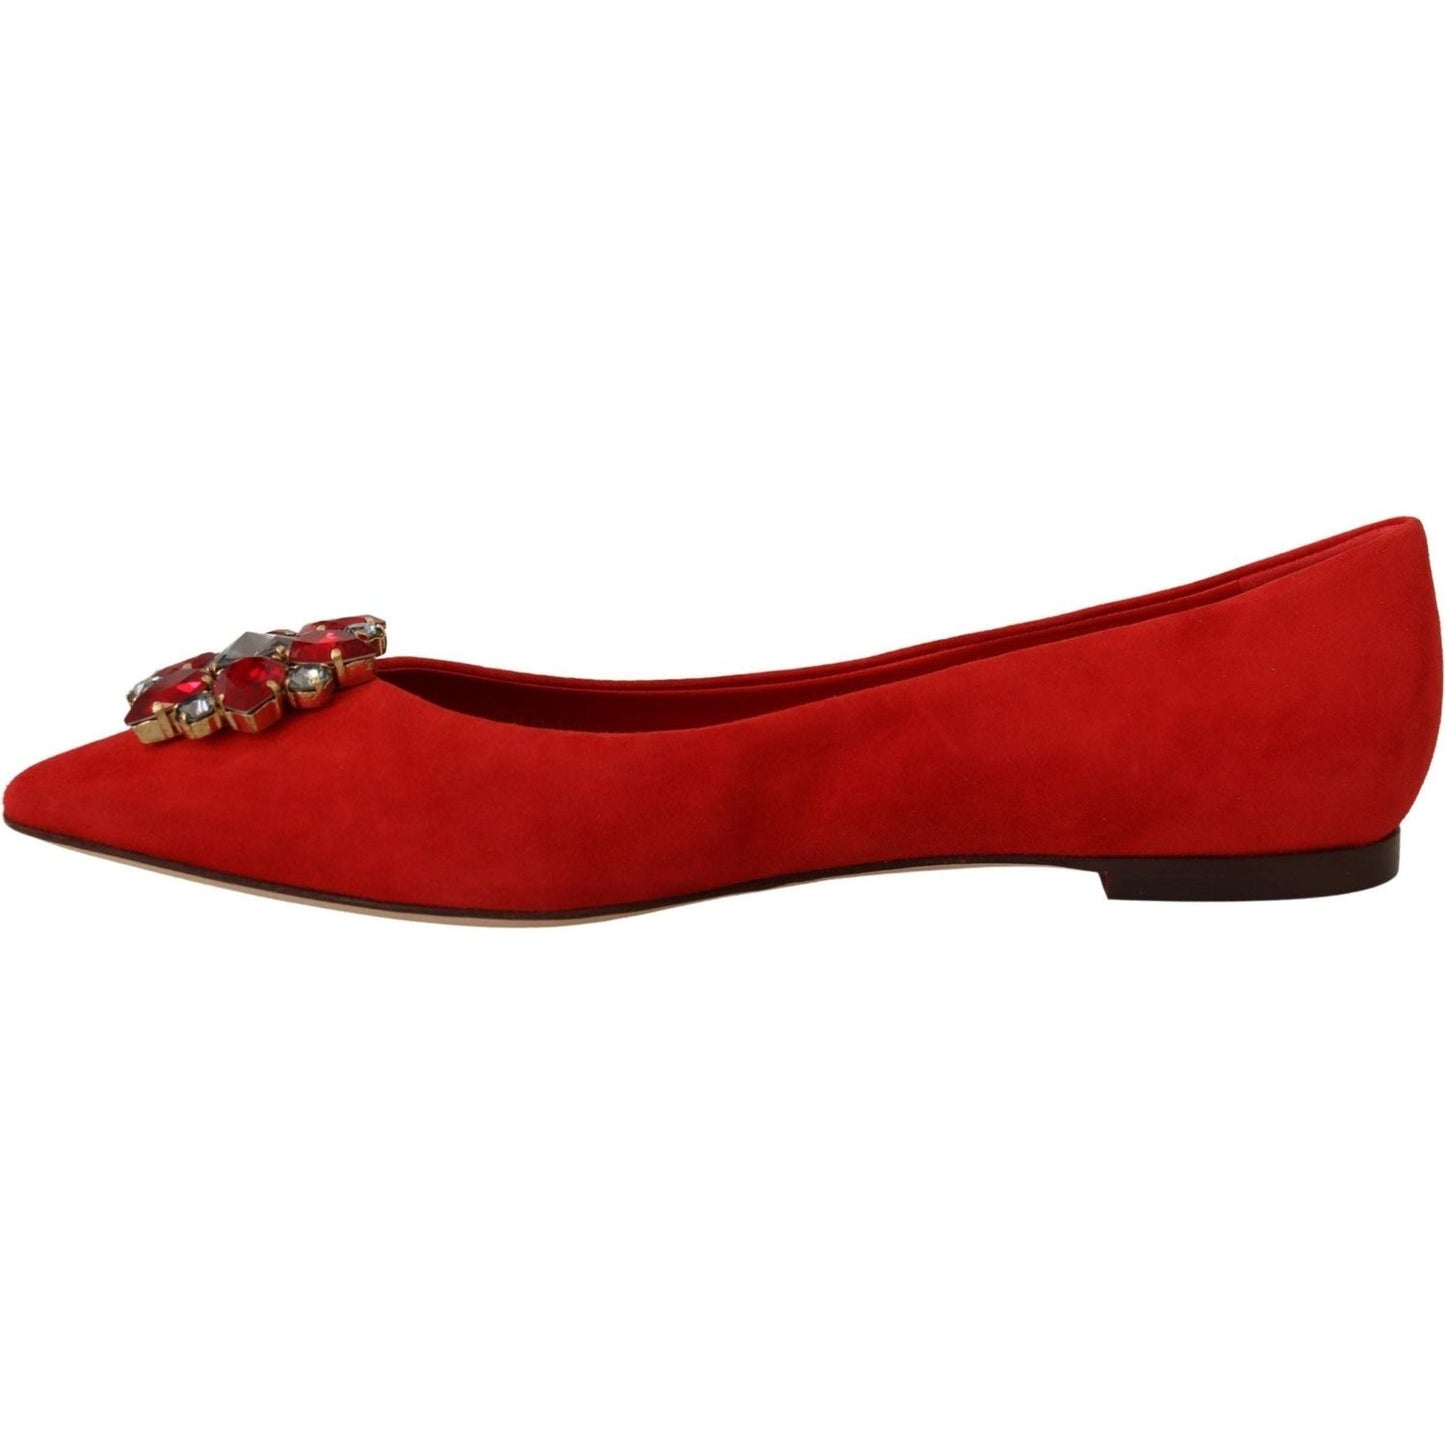 Dolce & Gabbana Crystal Embellished Red Suede Flats red-suede-crystals-loafers-flats-shoes-1 IMG_5649-scaled-40080405-9a0.jpg